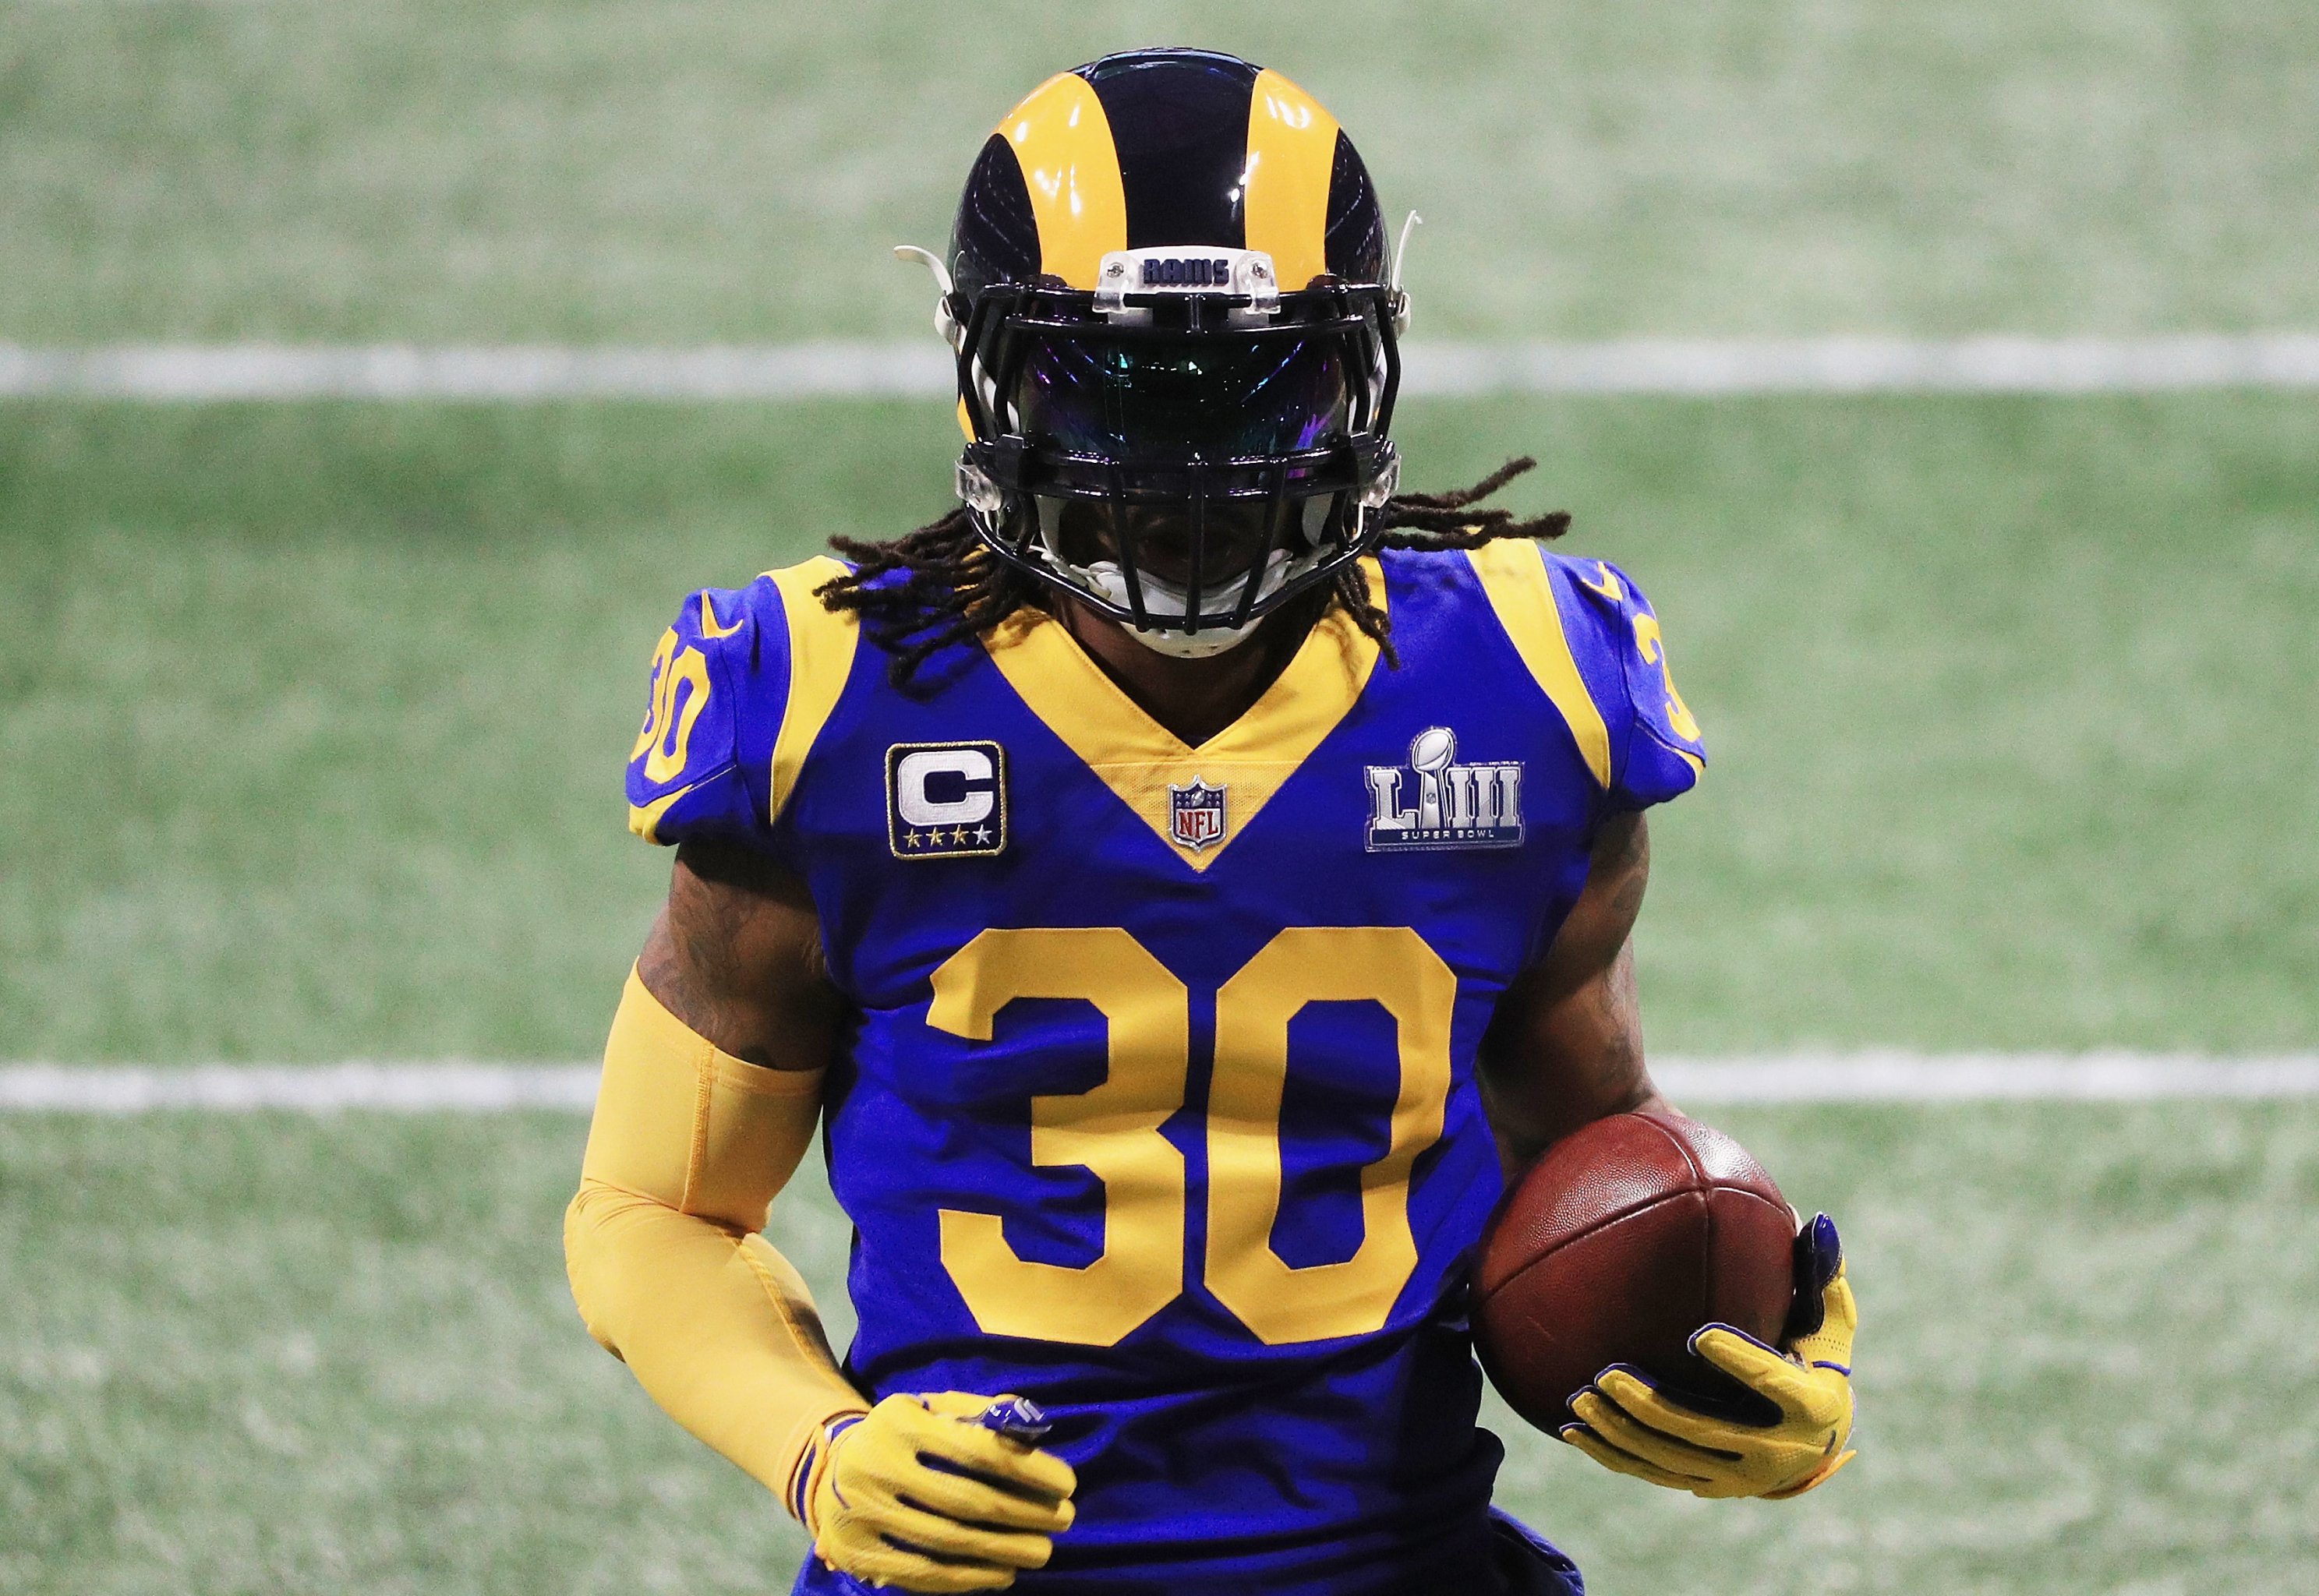 Rams RB Todd Gurley is a combination of legendary running backs